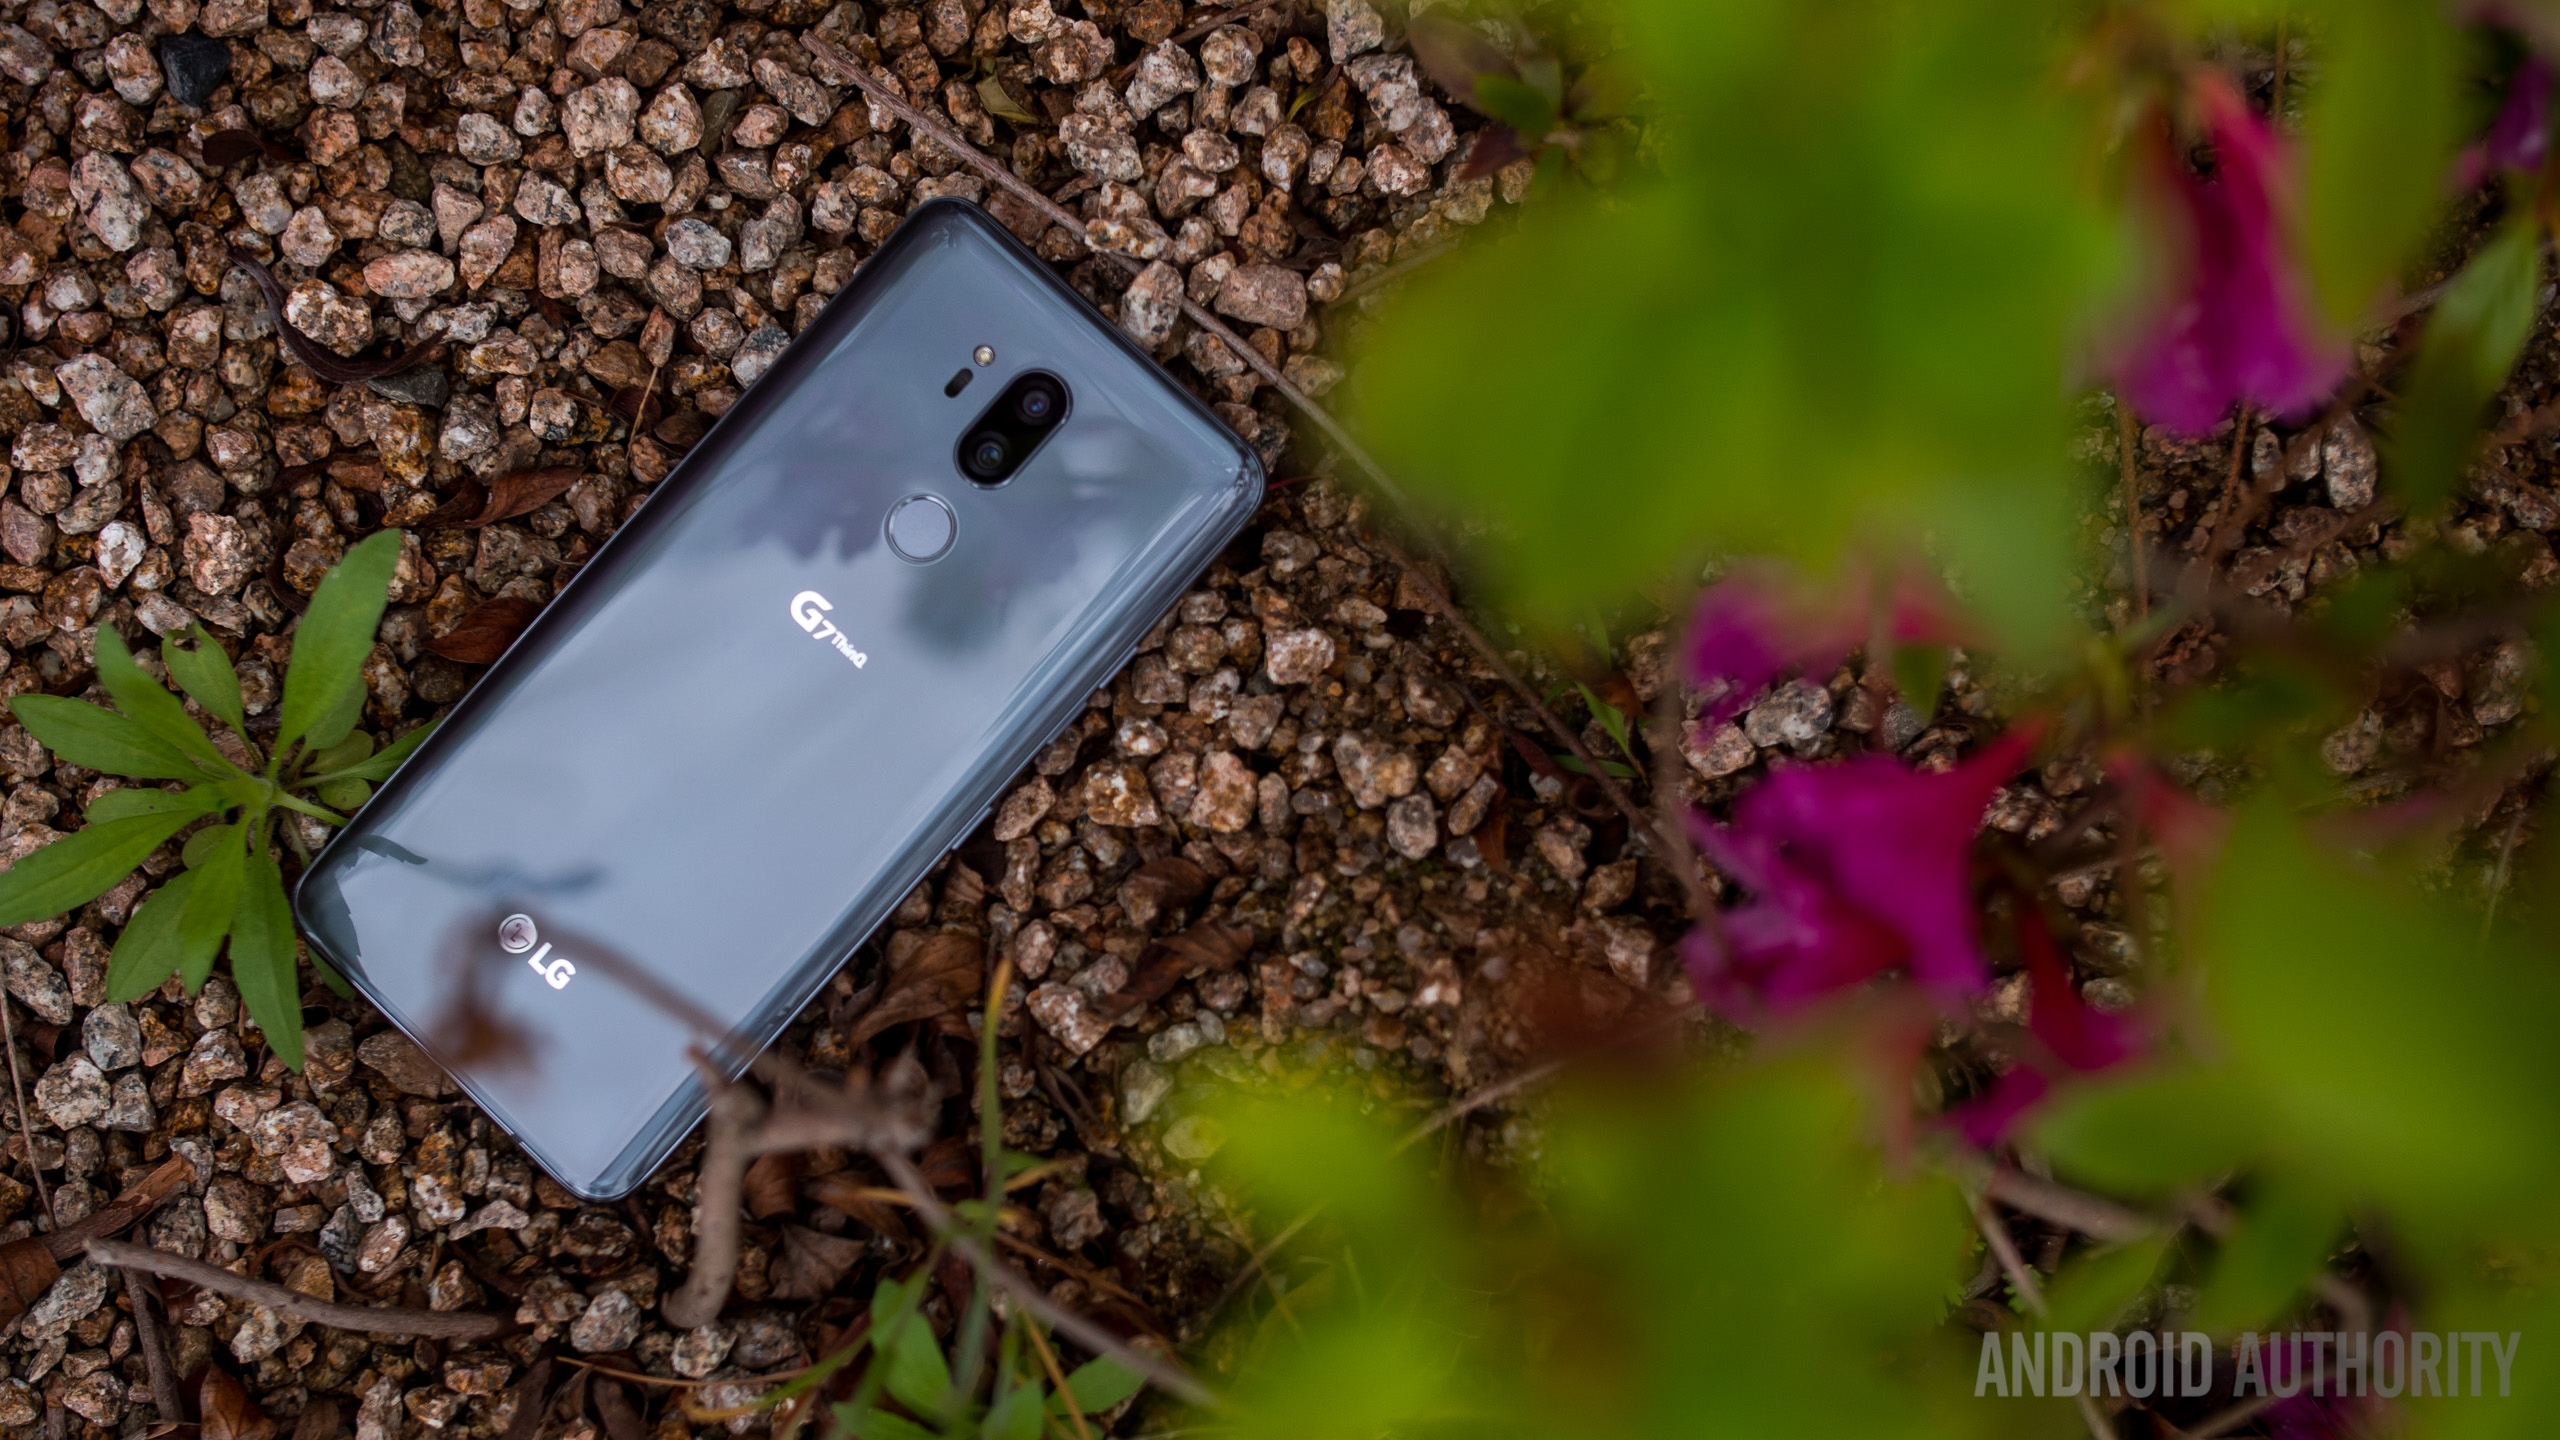 LG G7 review